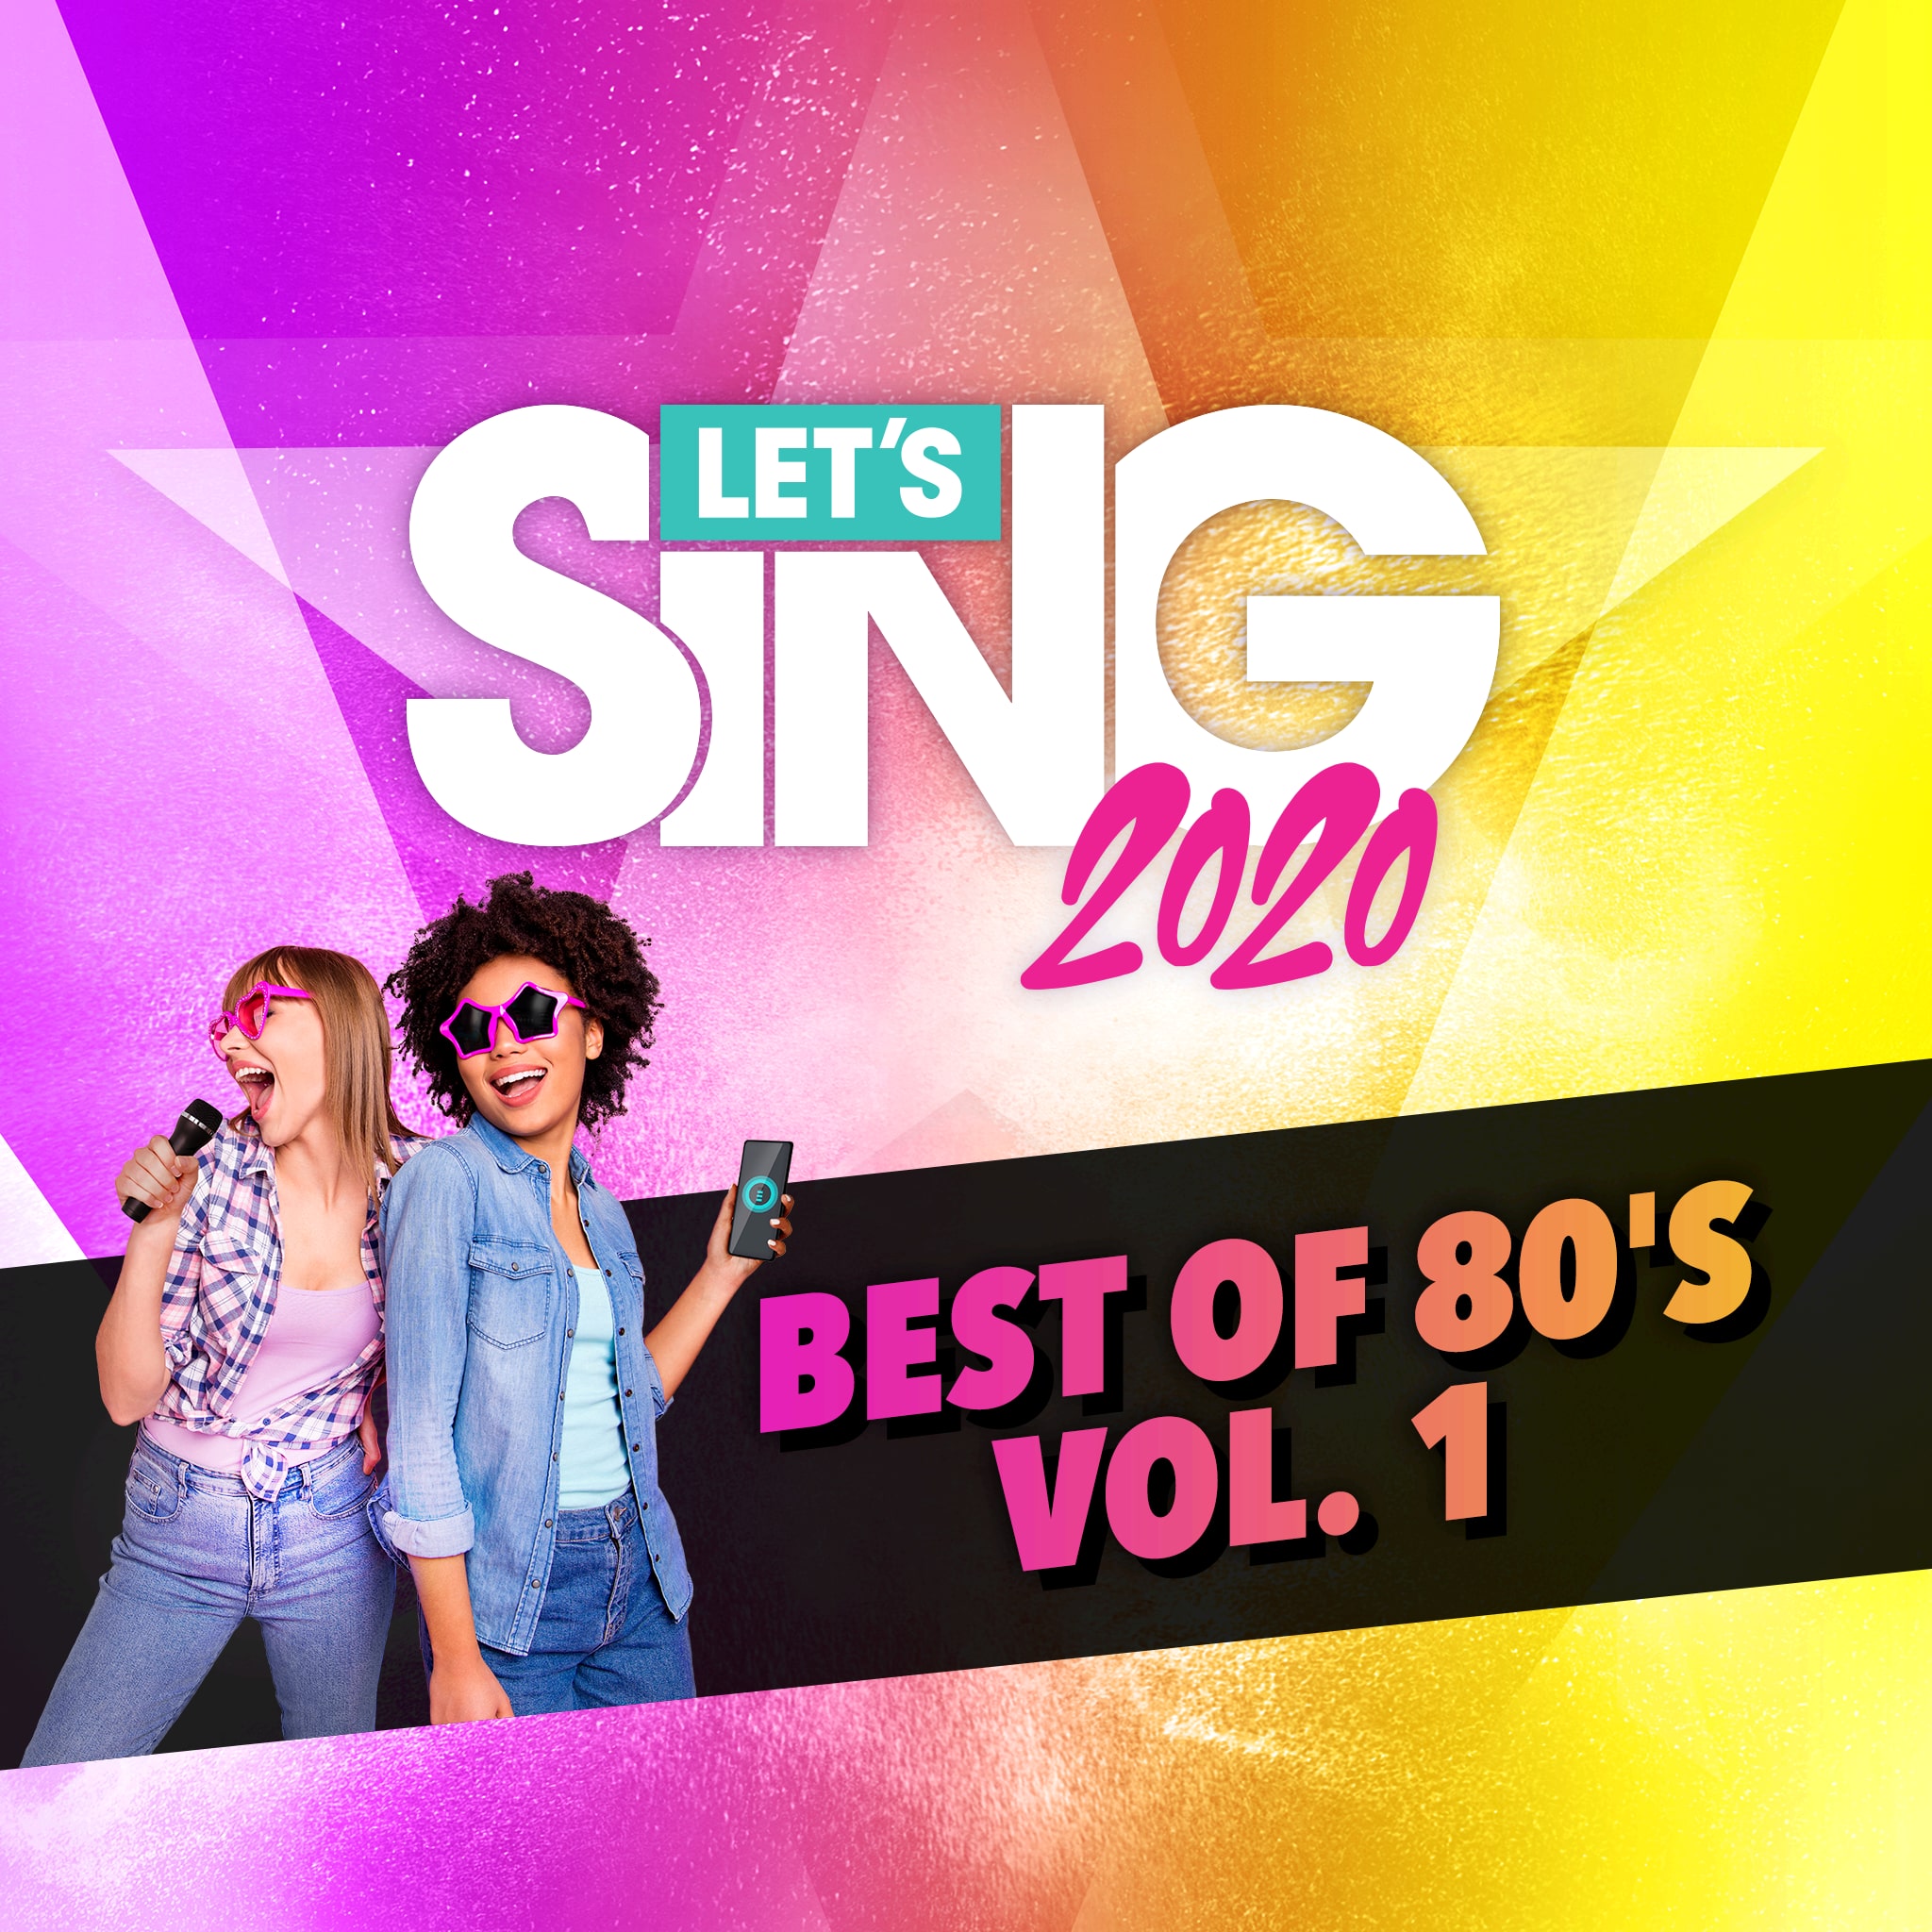 Let's Sing 2020 - Best of 80's Vol. 1 Song Pack